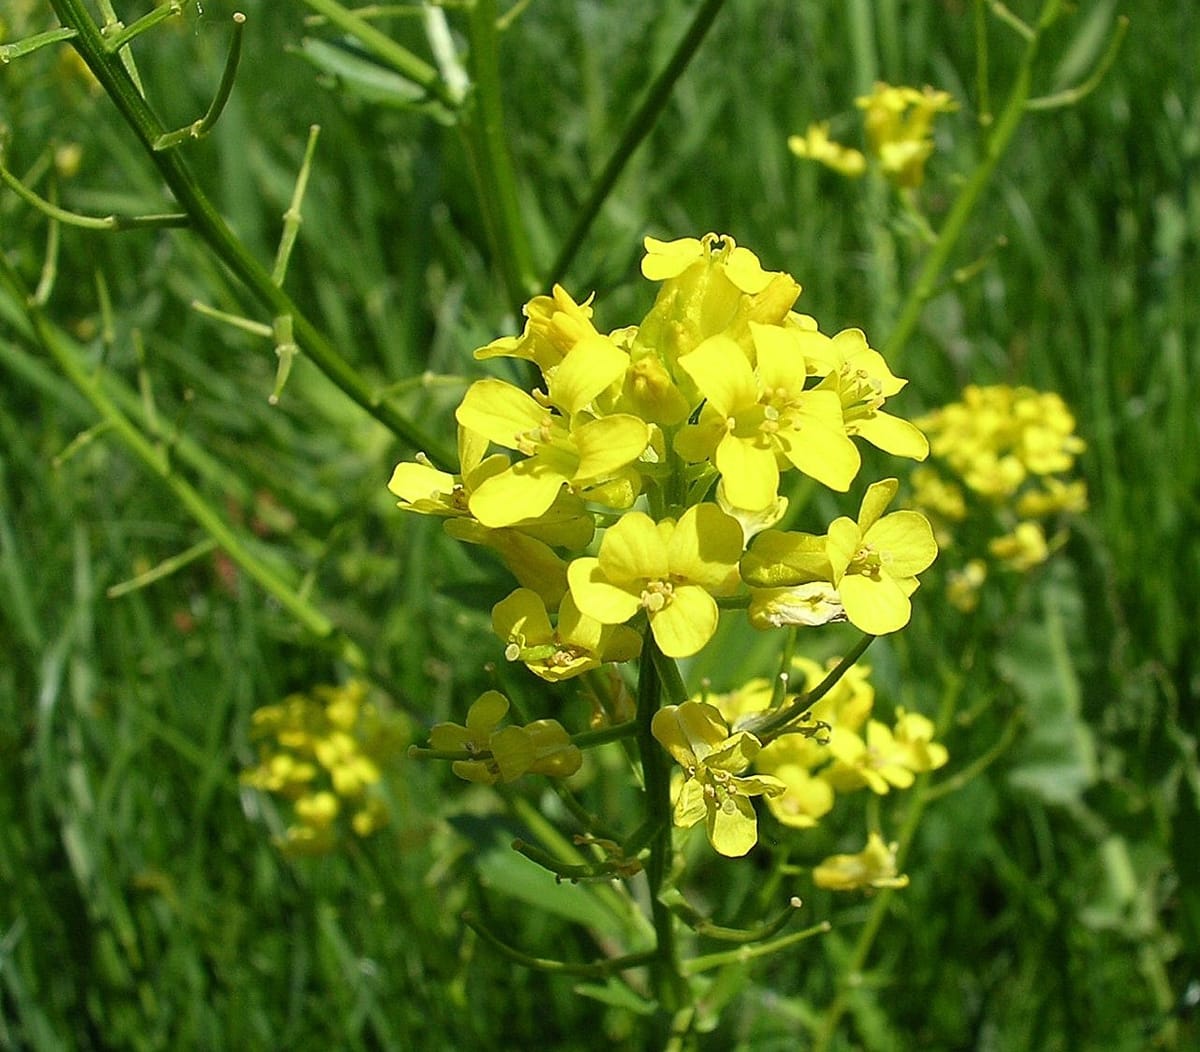 How to Grow Winter Cress